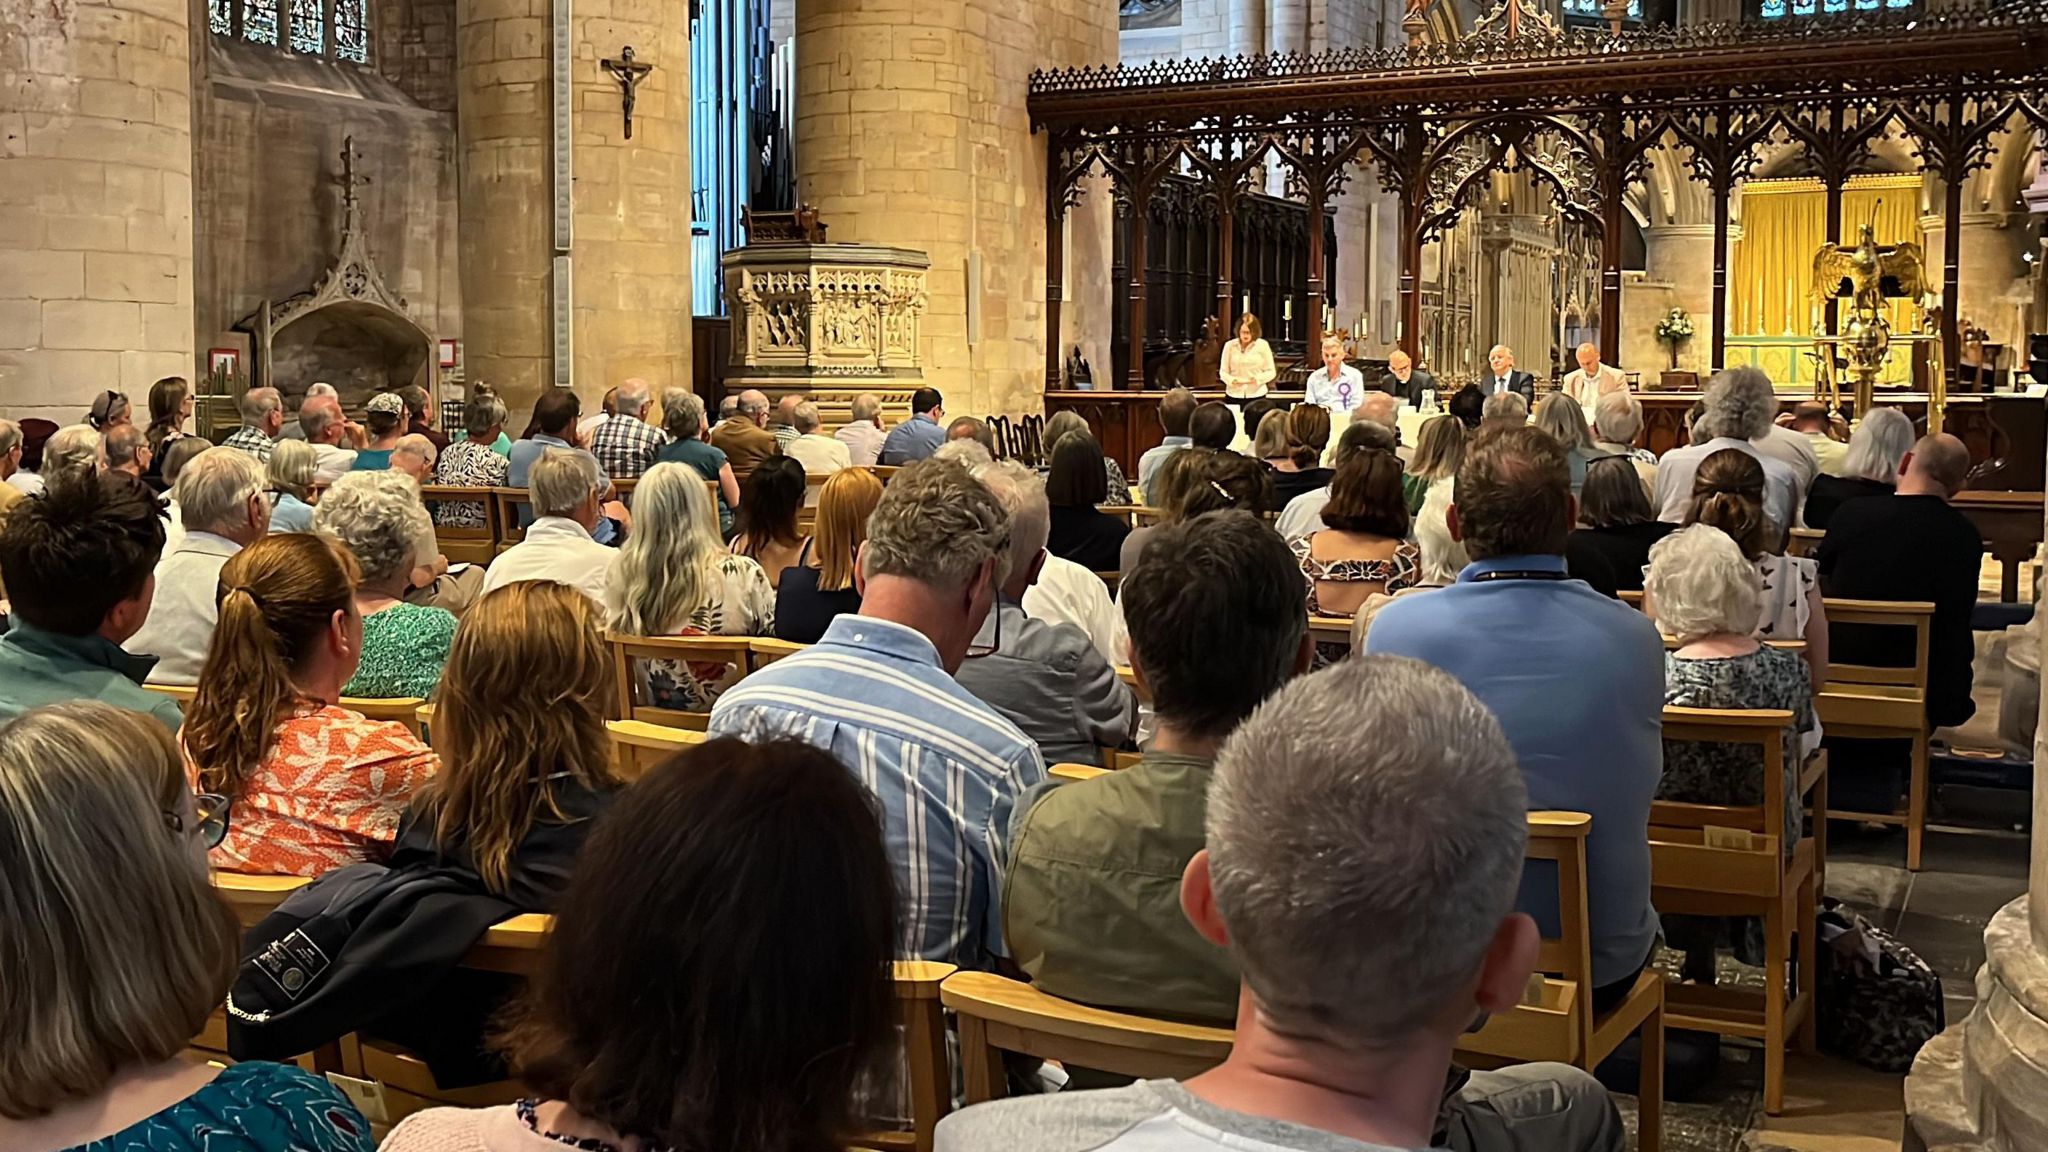 The hustings audience inside Tewkesbury Abbey looking towards the four parliamentary candidates Cate Cody, Laurence Robertson, David Edgar and Cameron Thomas.